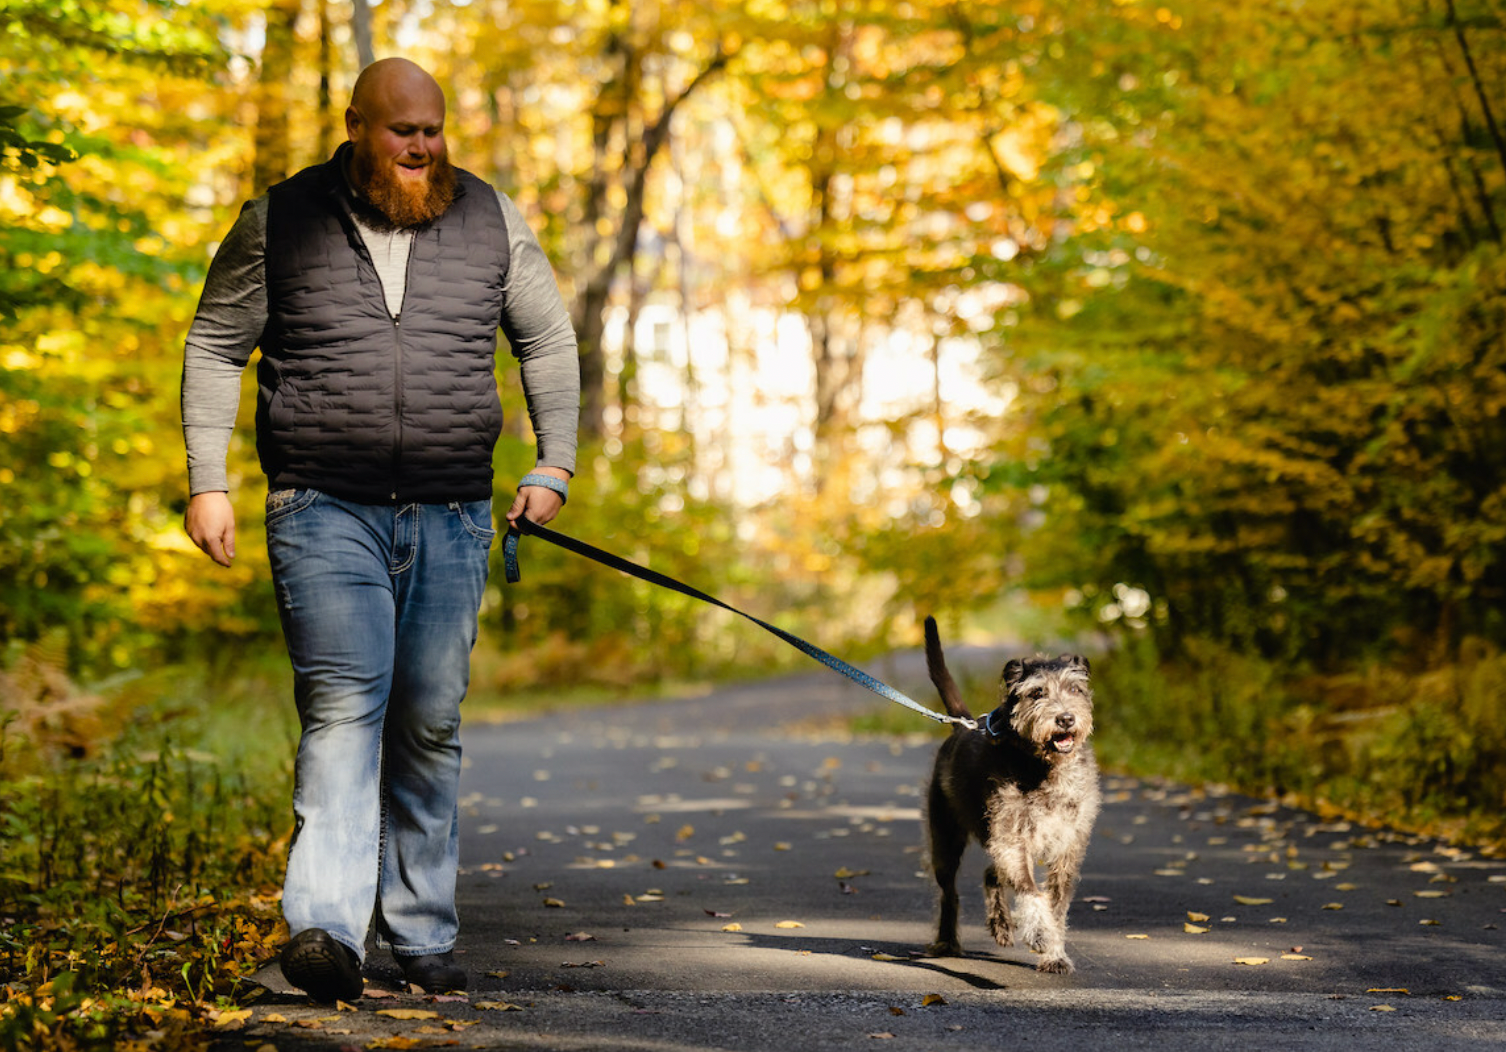 Chris Hughes, founder of the Mr Mo Project, walking with Quinn, a senior rescue dog (Photo courtesy of YuMOVE). 


